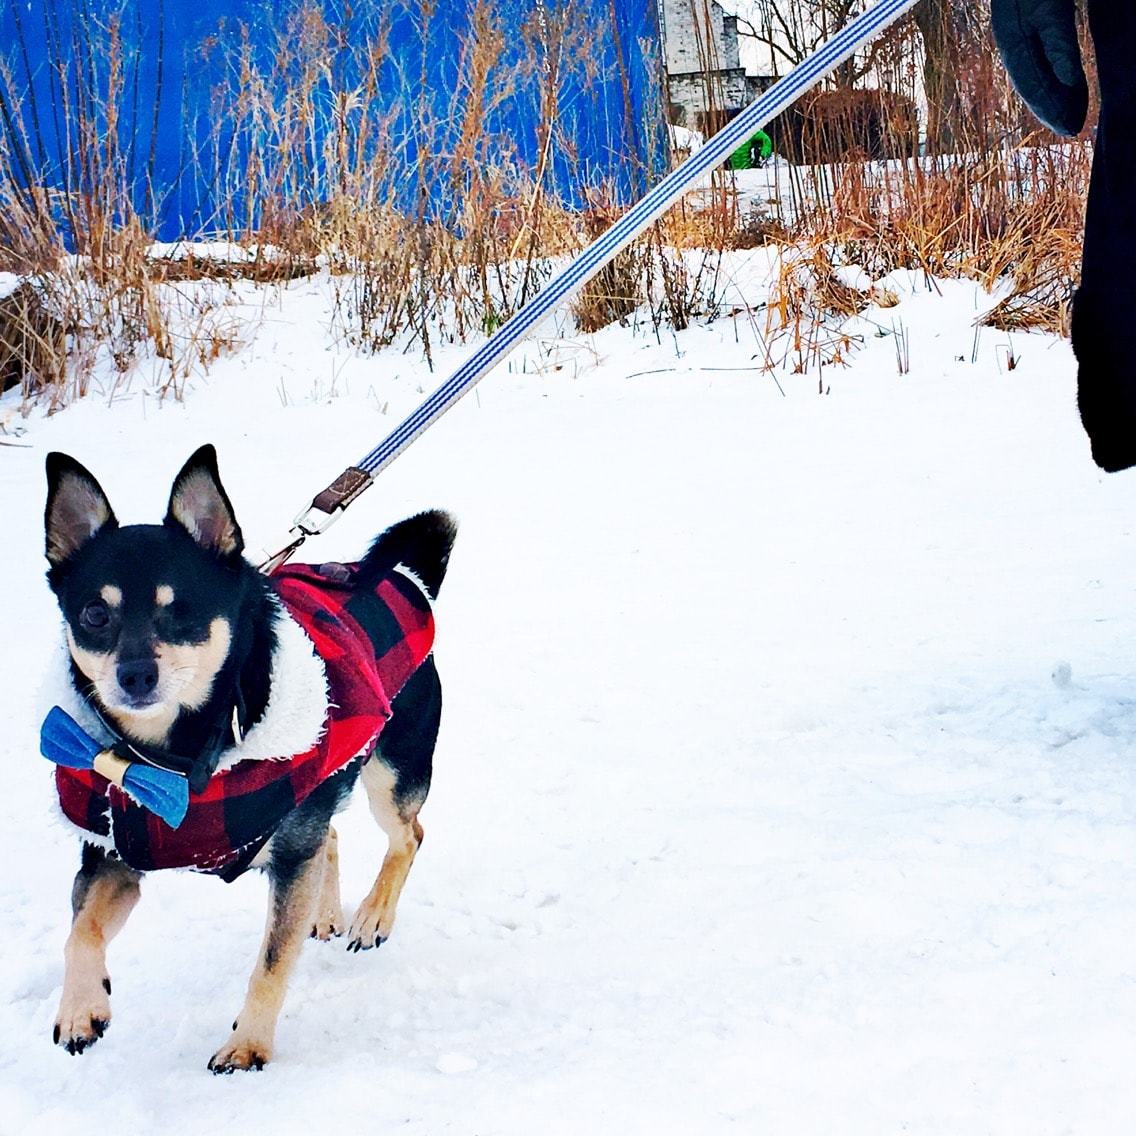 take your canine hiking for a fun activity during winter